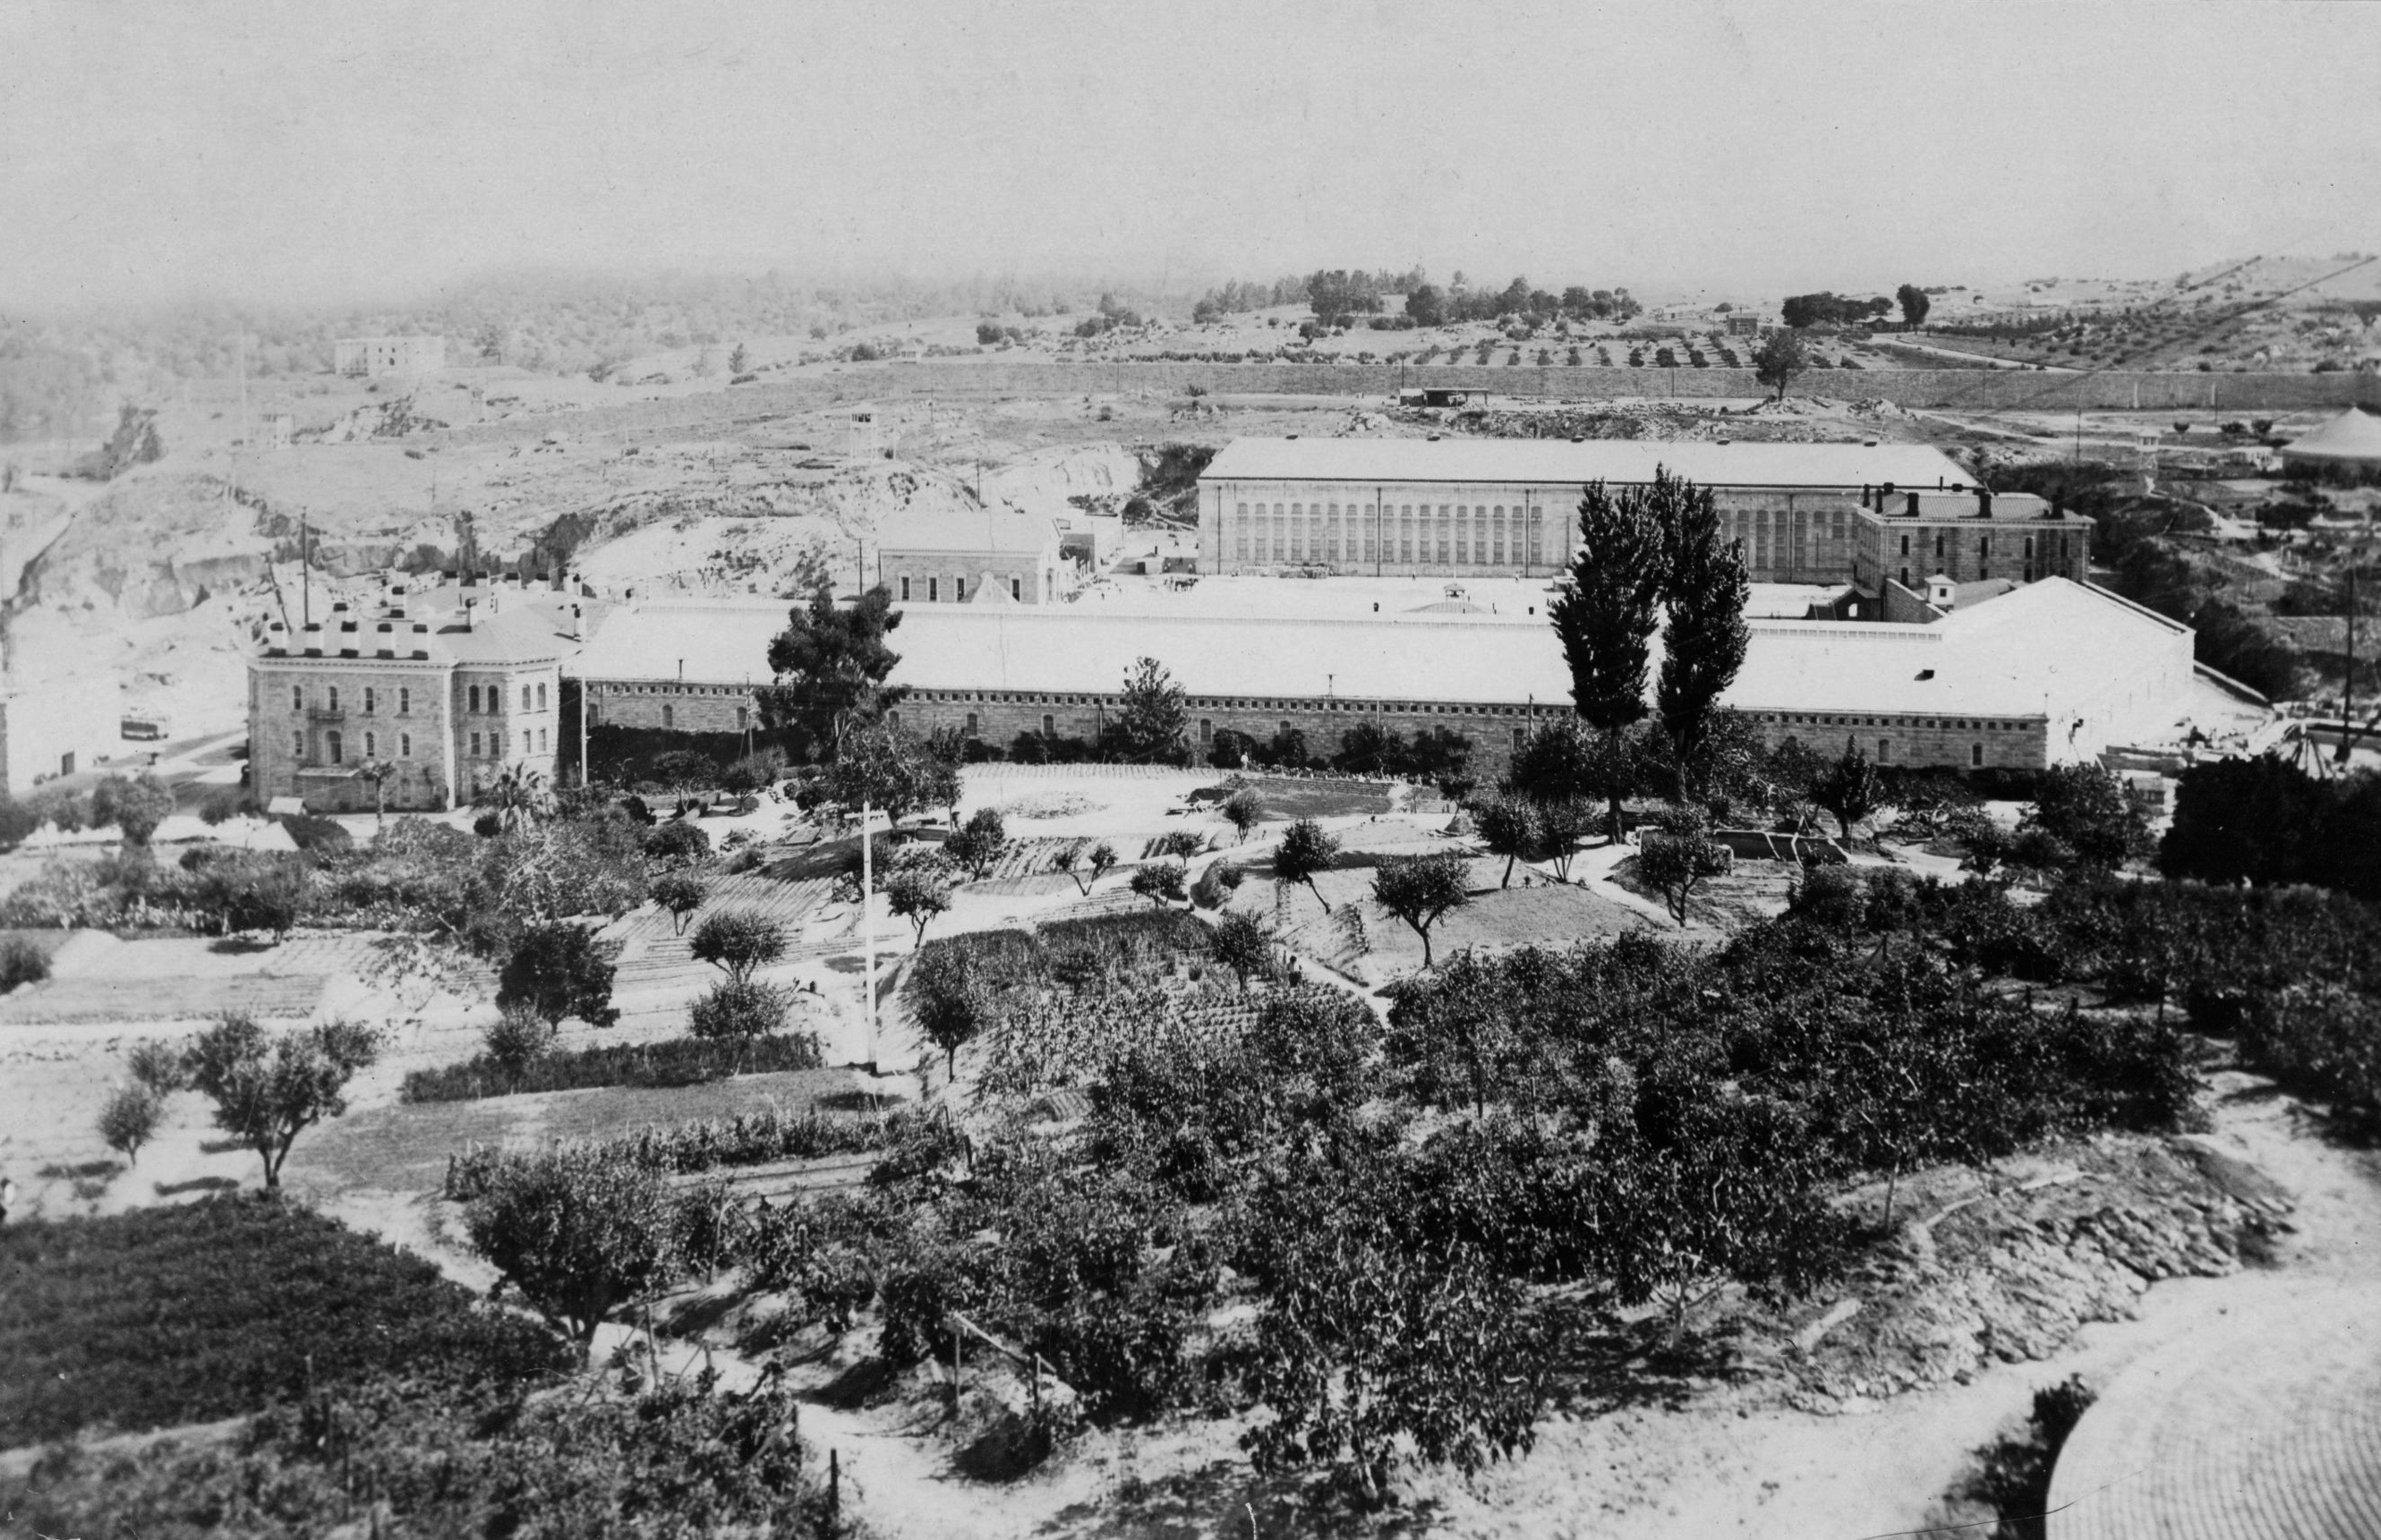 A farm in the foreground and prison in the background.